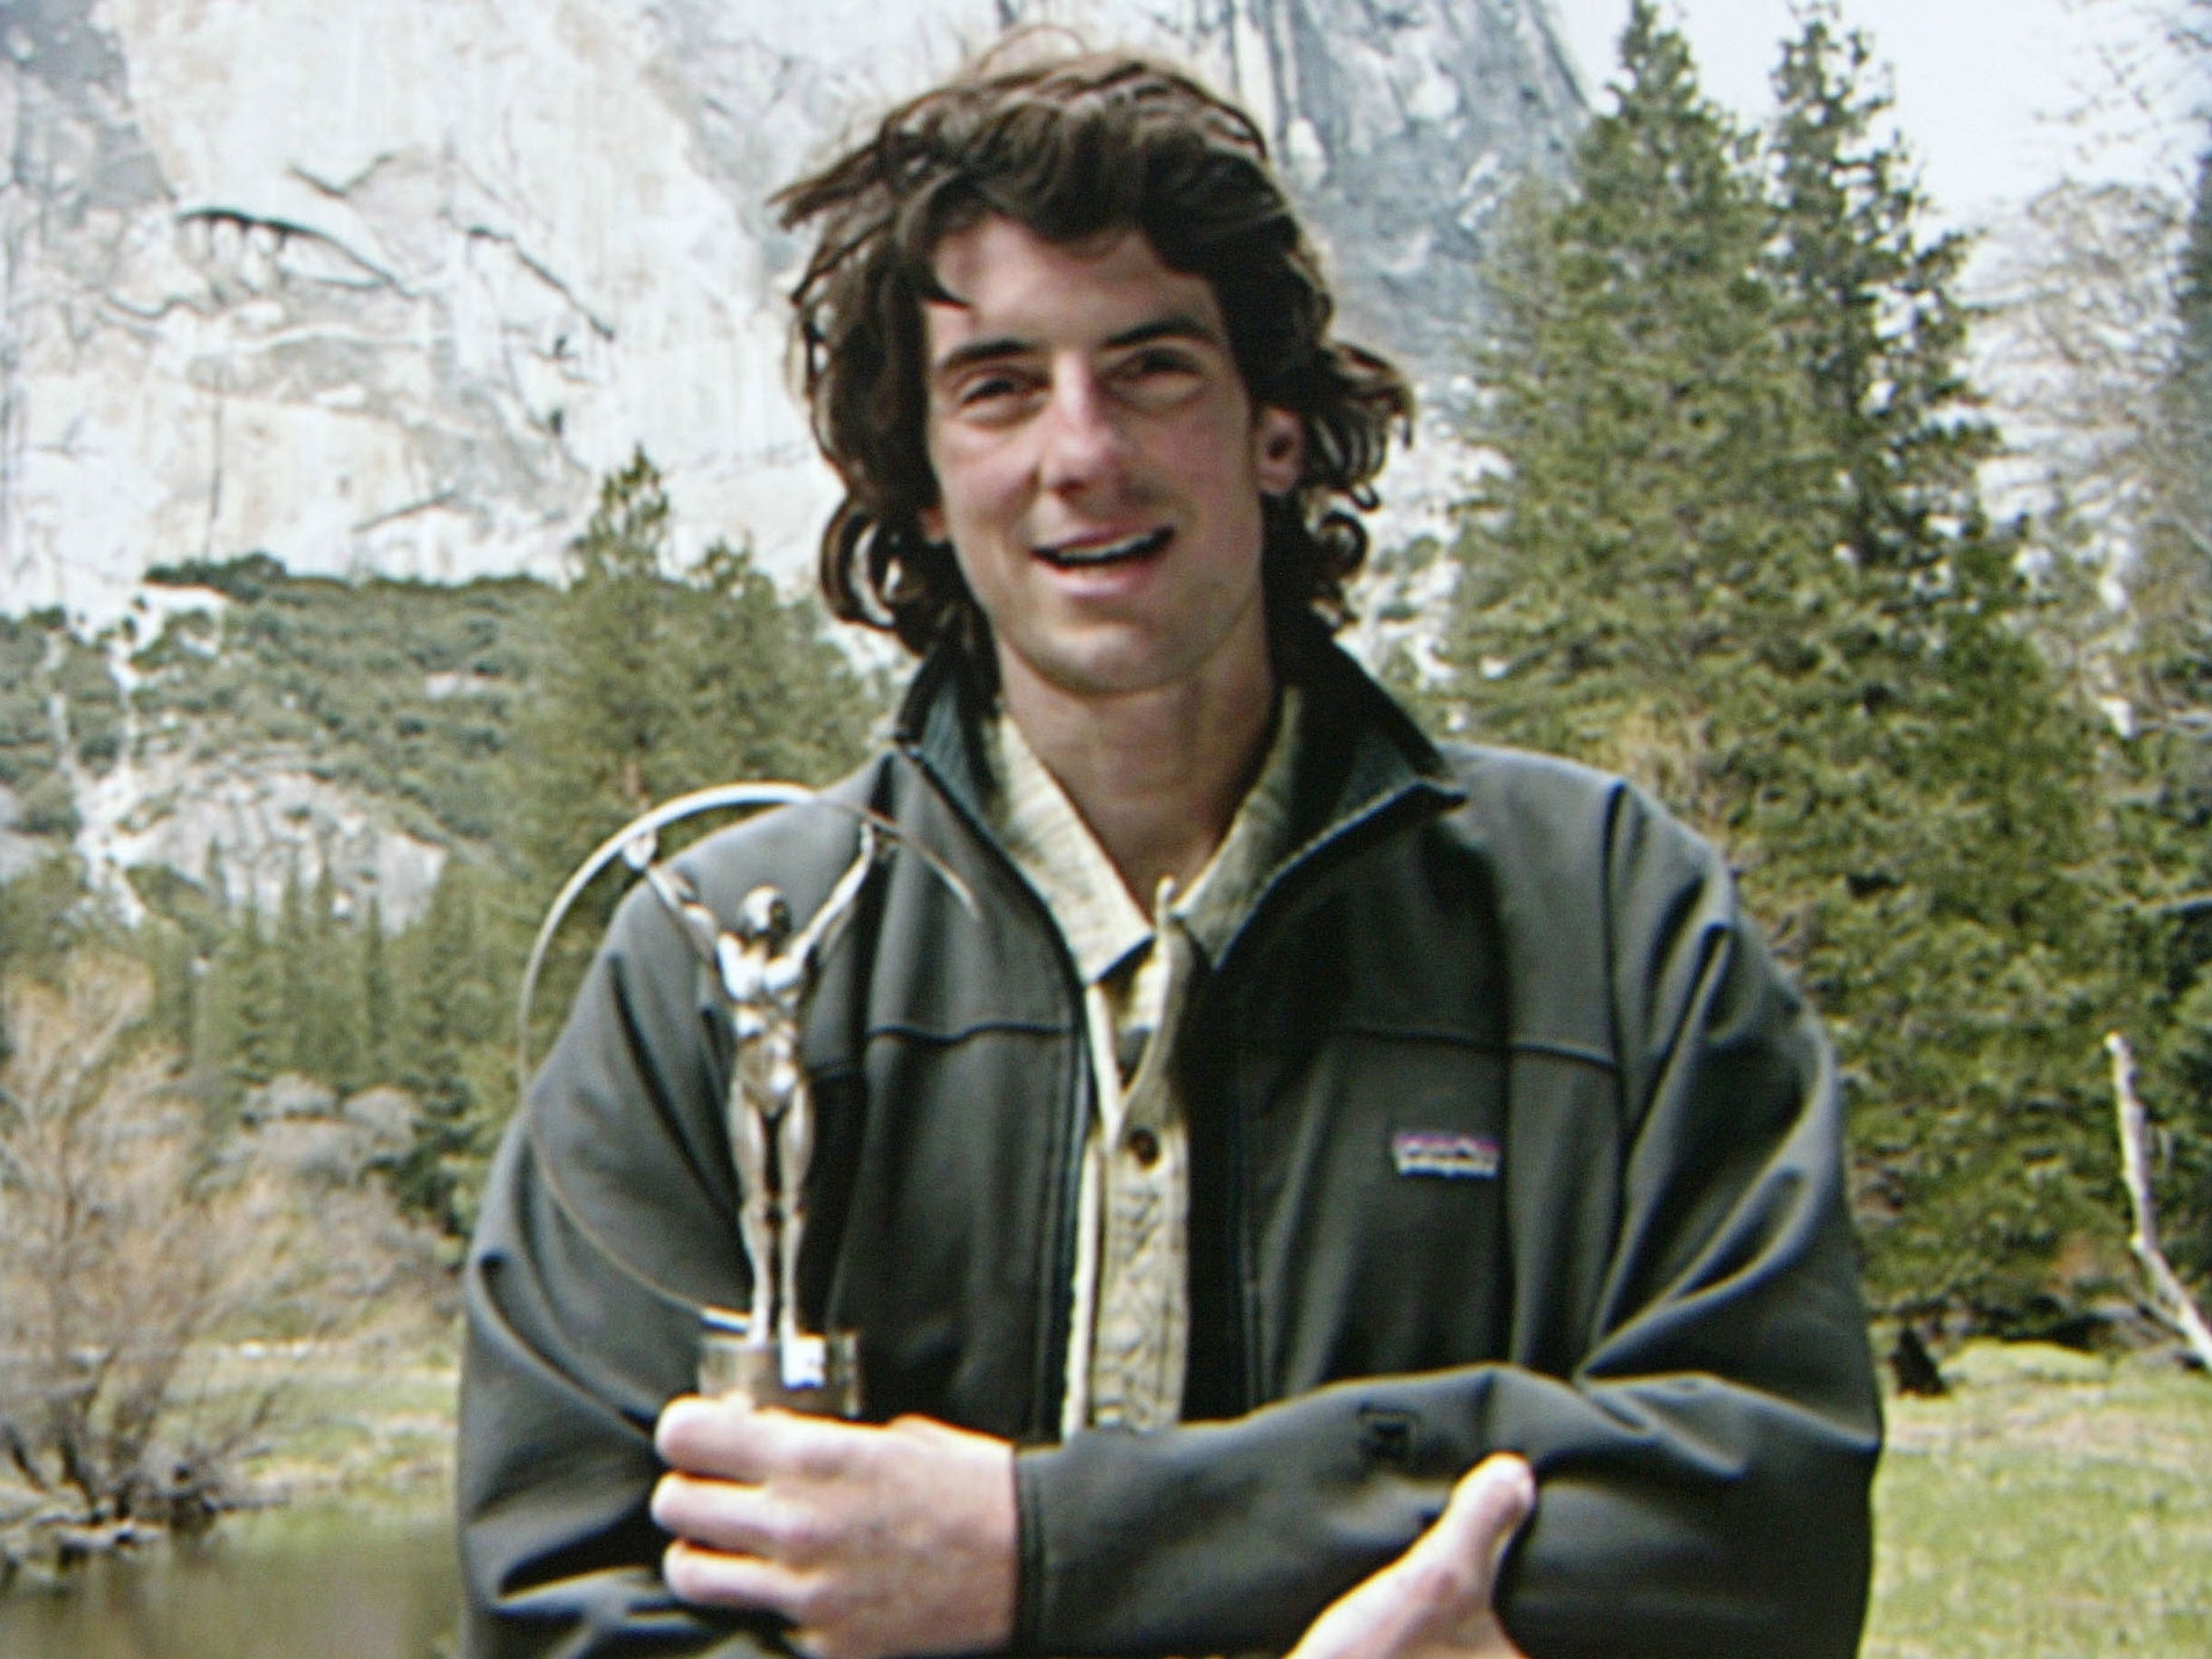 Dean Potter, pictured here in 2003 receiving his award for World Alternative Sportsman of the Year, died in a wingsuit accident in Yosemite